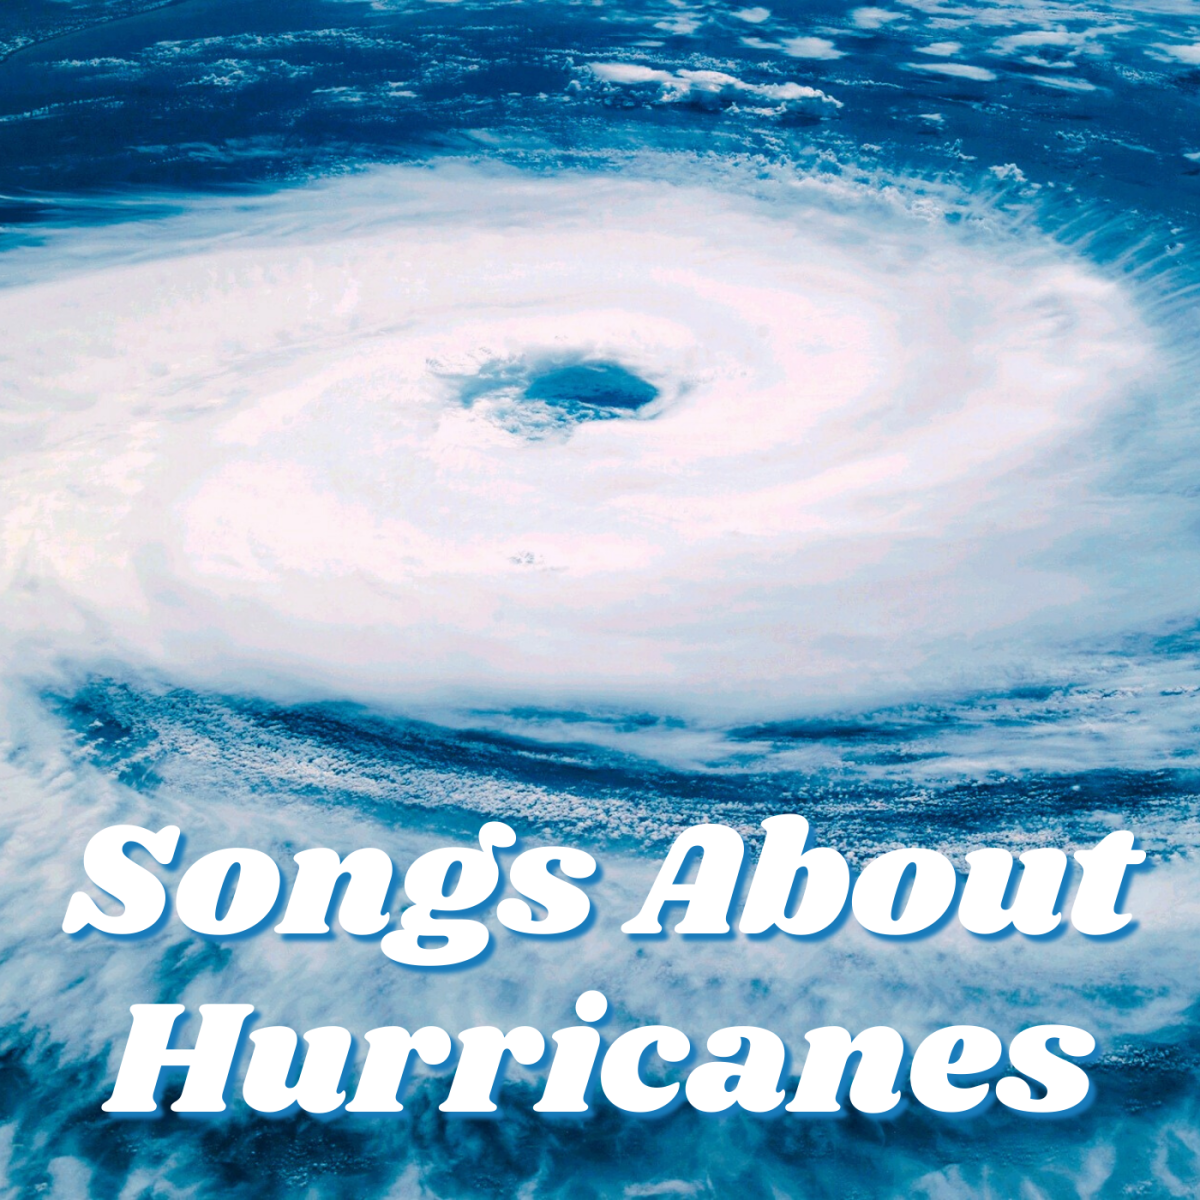 When a hurricane threatens to blow in, don't mess around. Rely on this hurricane playlist as you either shelter in place or evacuate to safety. We have a list of pop, rock, and country songs about hurricanes to help you weather the storm.